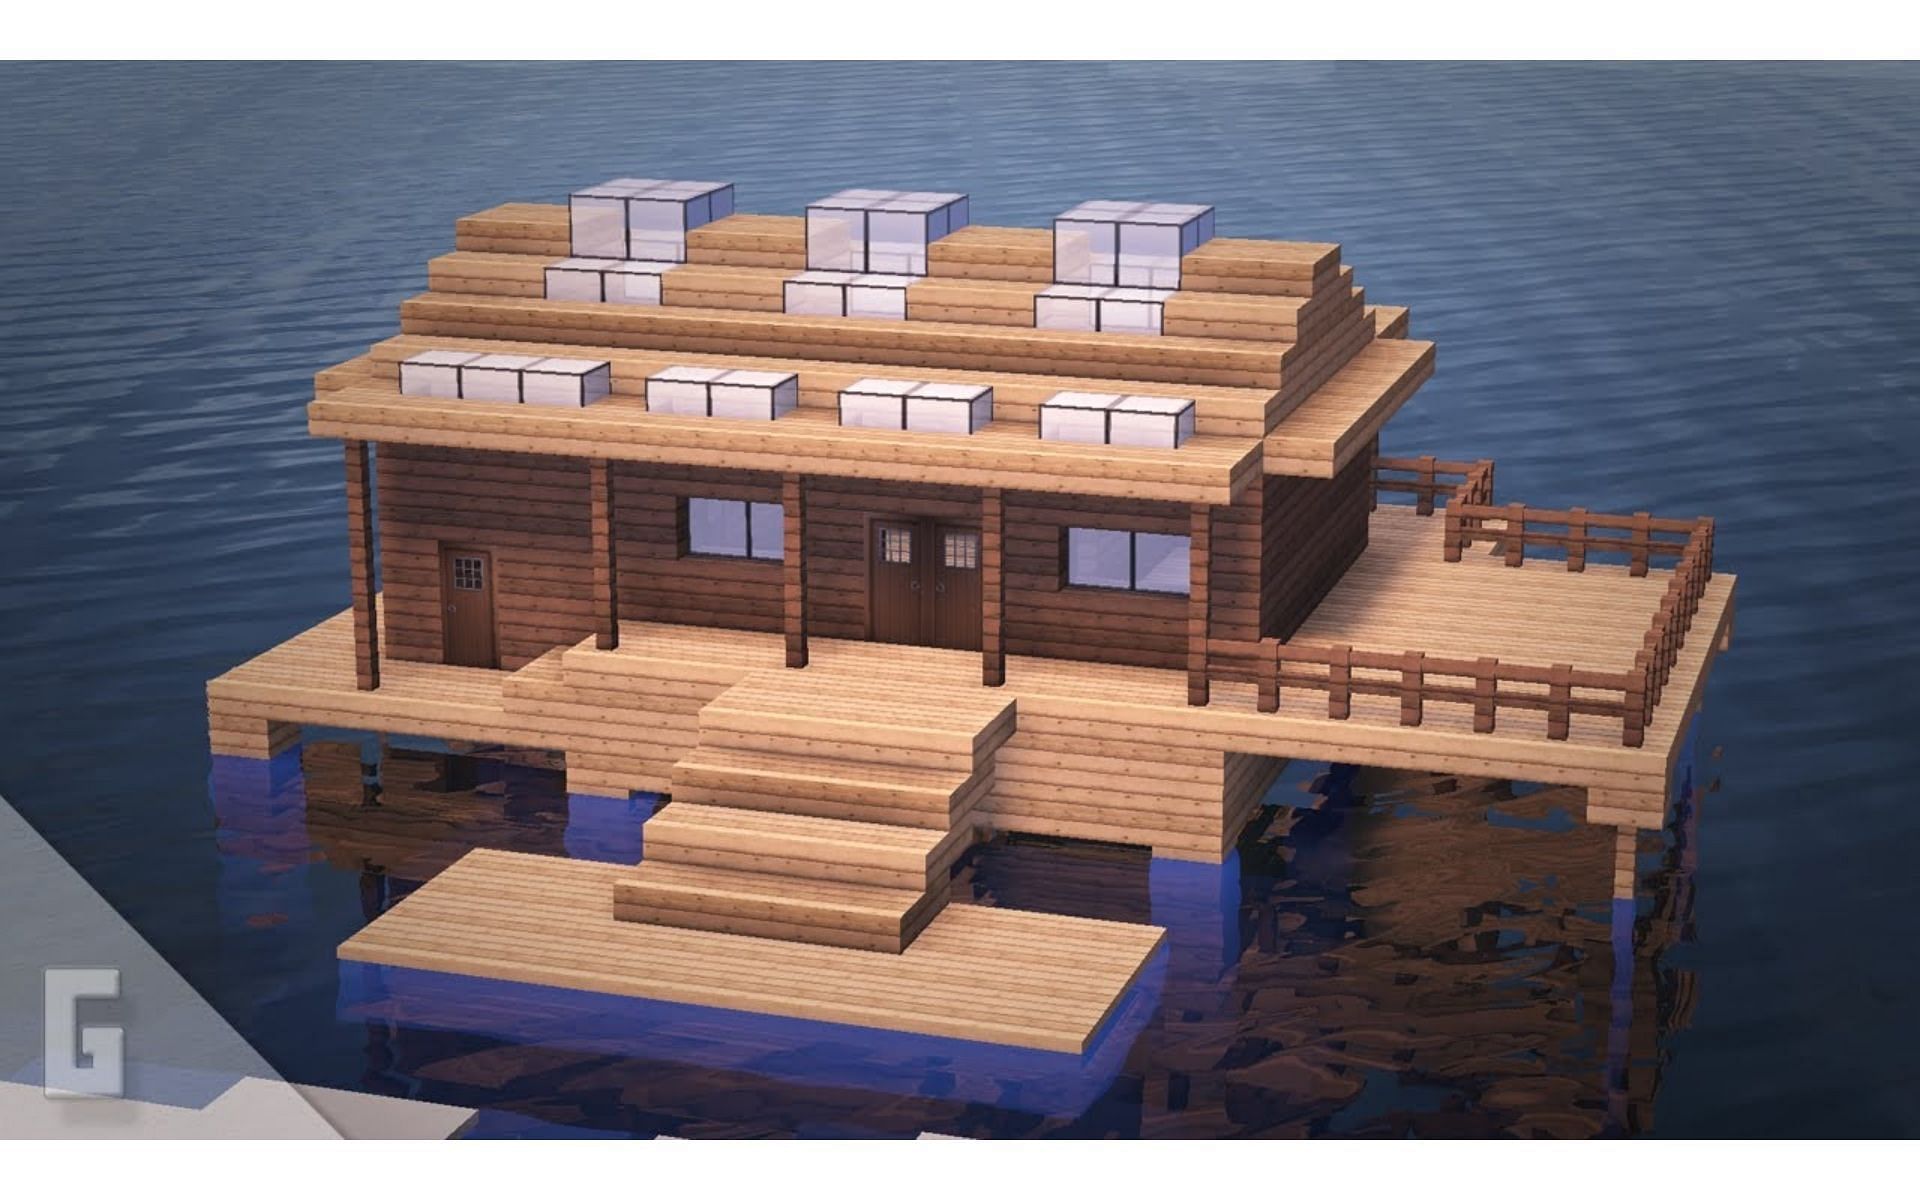 Live out on the seas with this pier house. (Image via YouTube/Greg Builds)